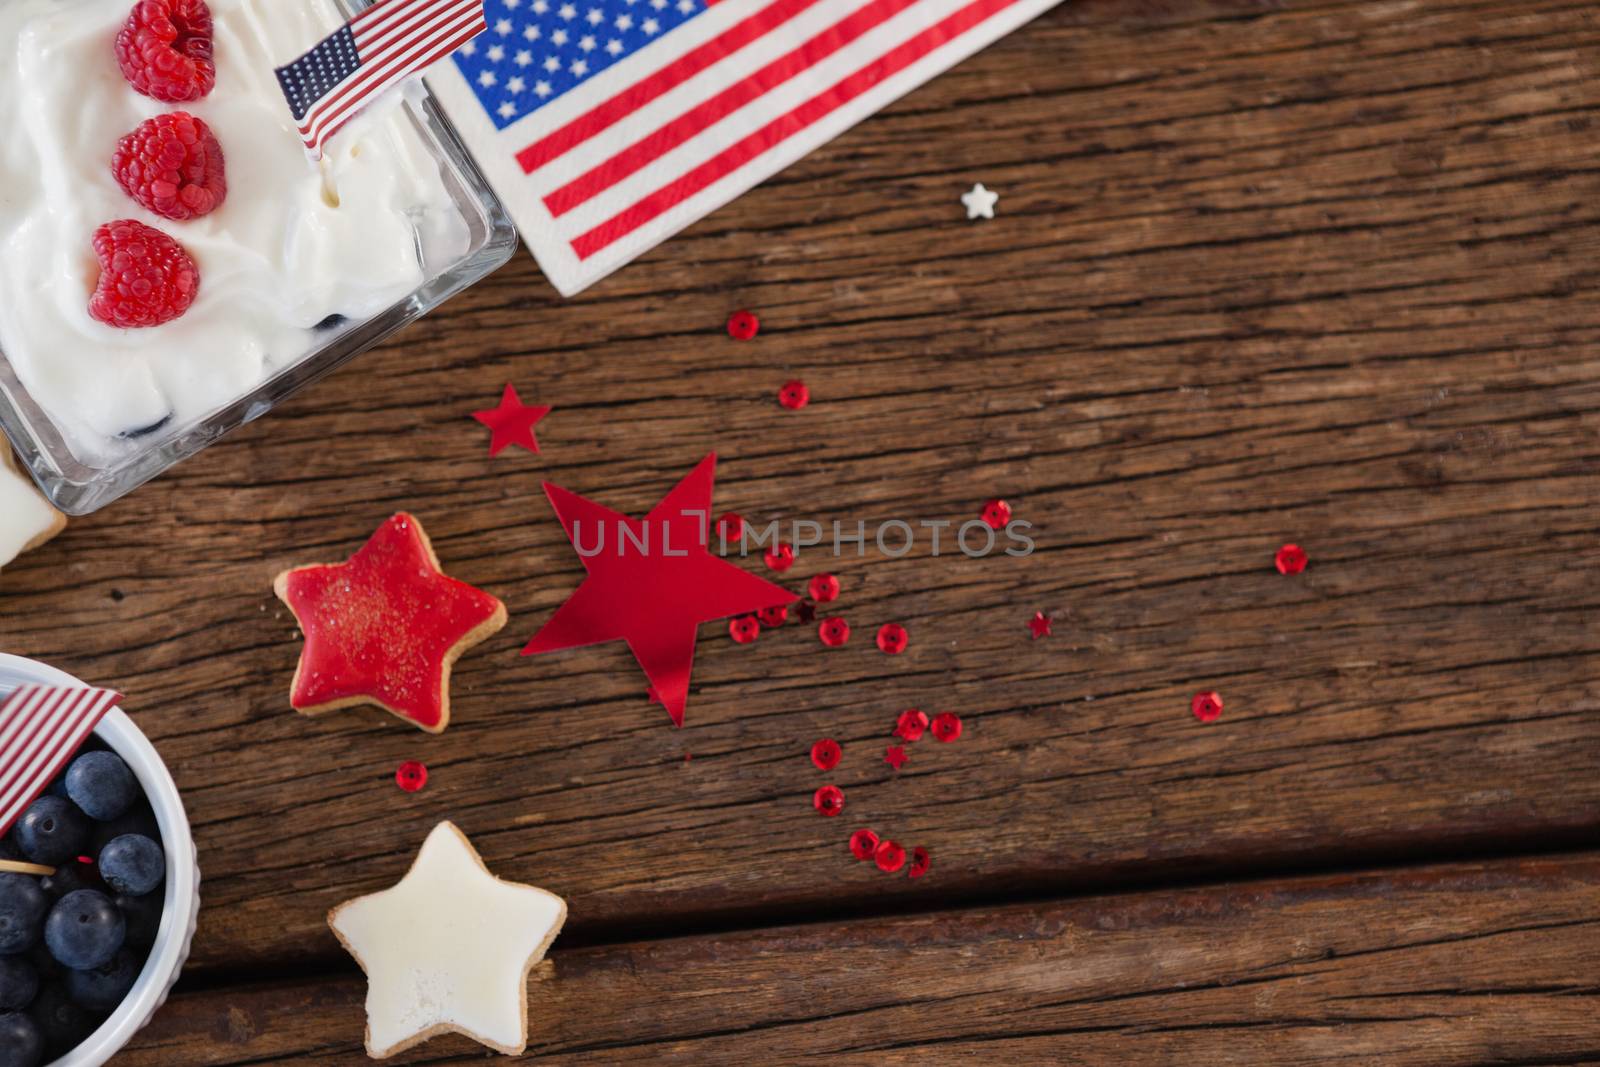 Sweet food and star shape decoration arranged on wooden table with 4th July theme